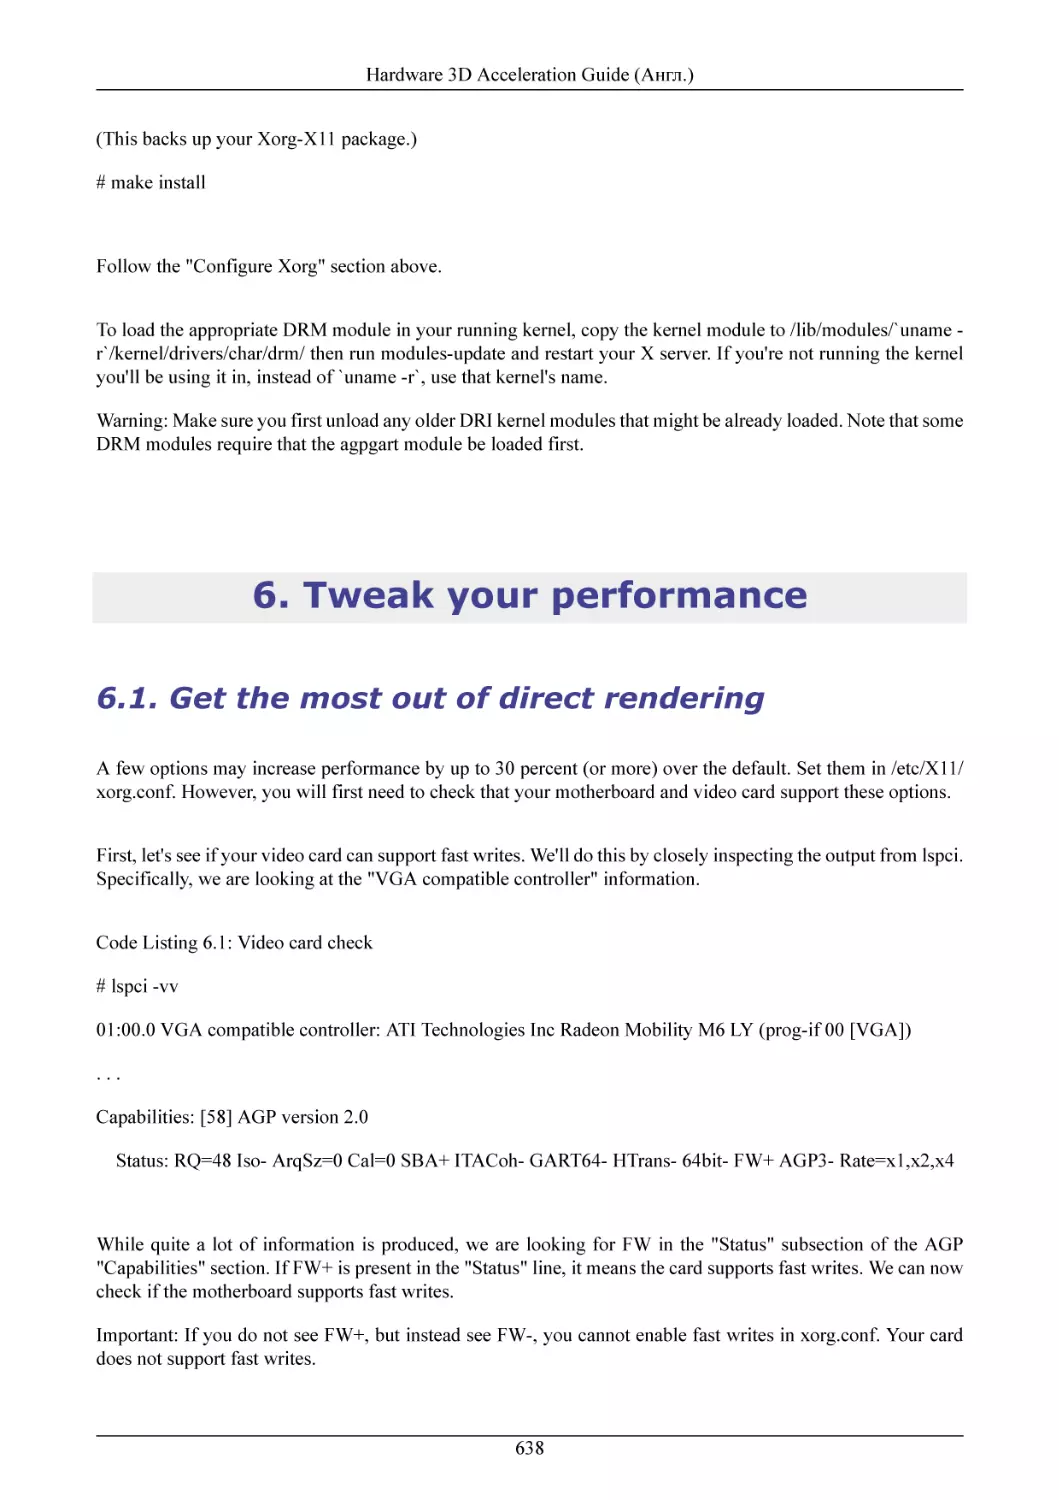 Tweak your performance
Get the most out of direct rendering